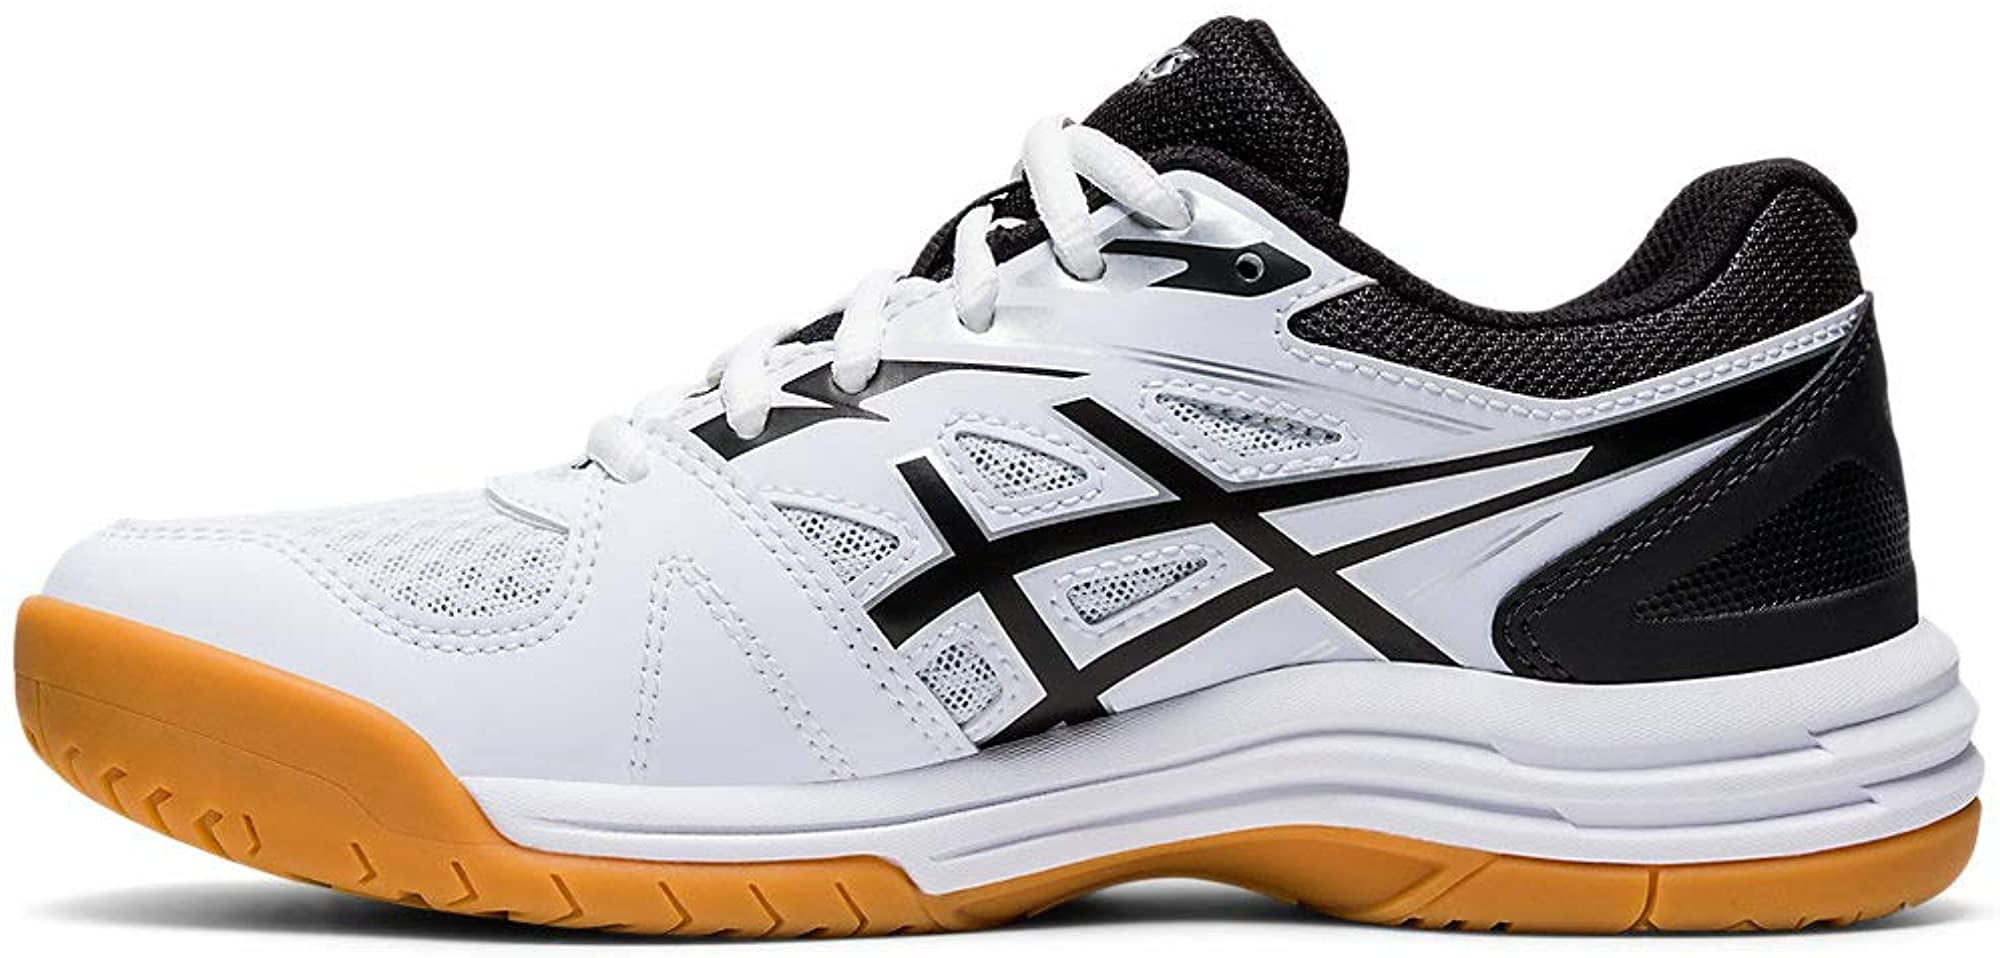 asics youth volleyball shoes